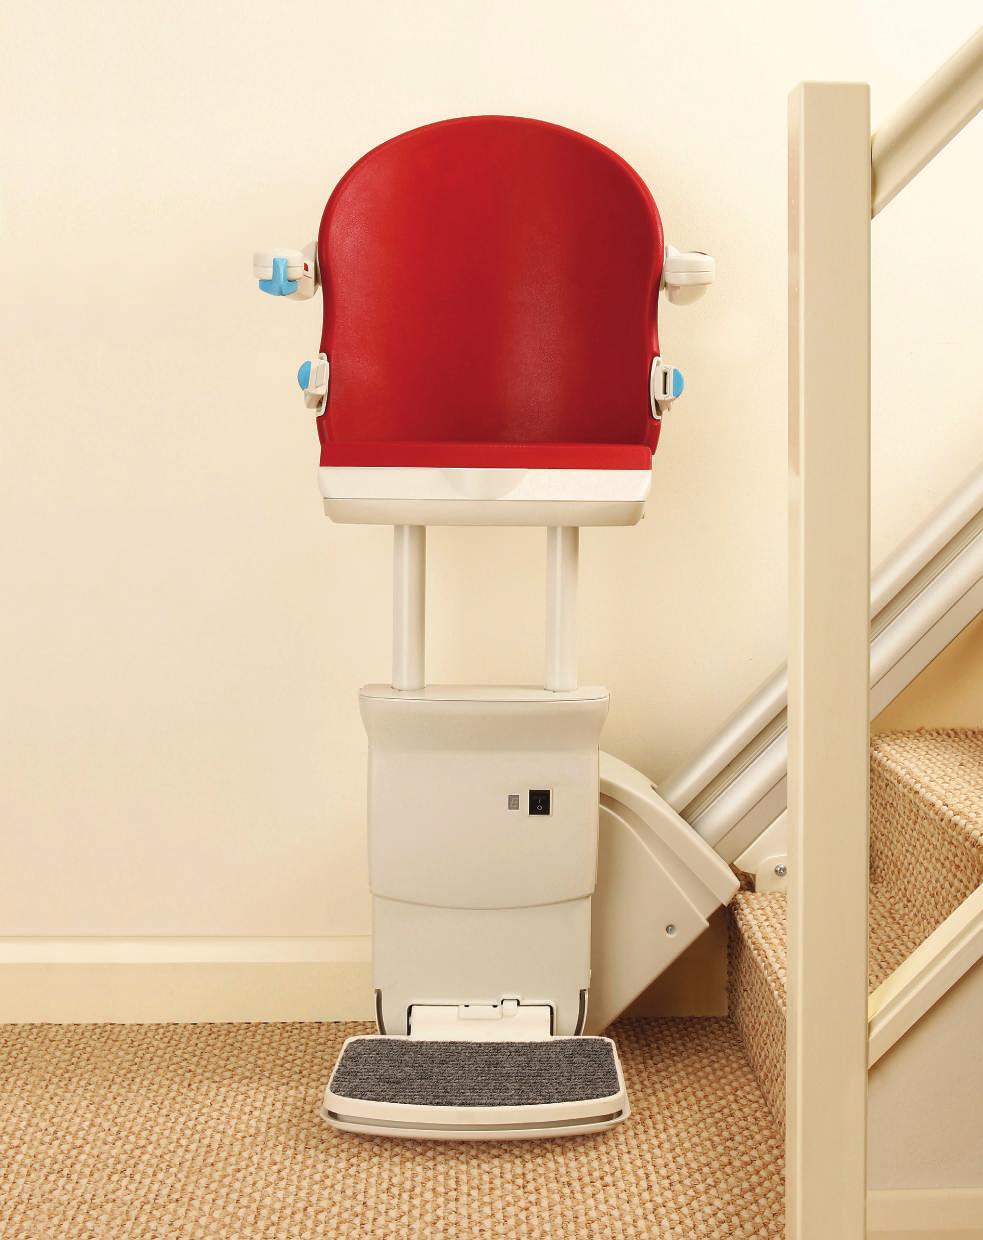 Perch Seats Straight and curved stairlifts If you have restricted movement in the knee or hip joints you may find sitting painful.